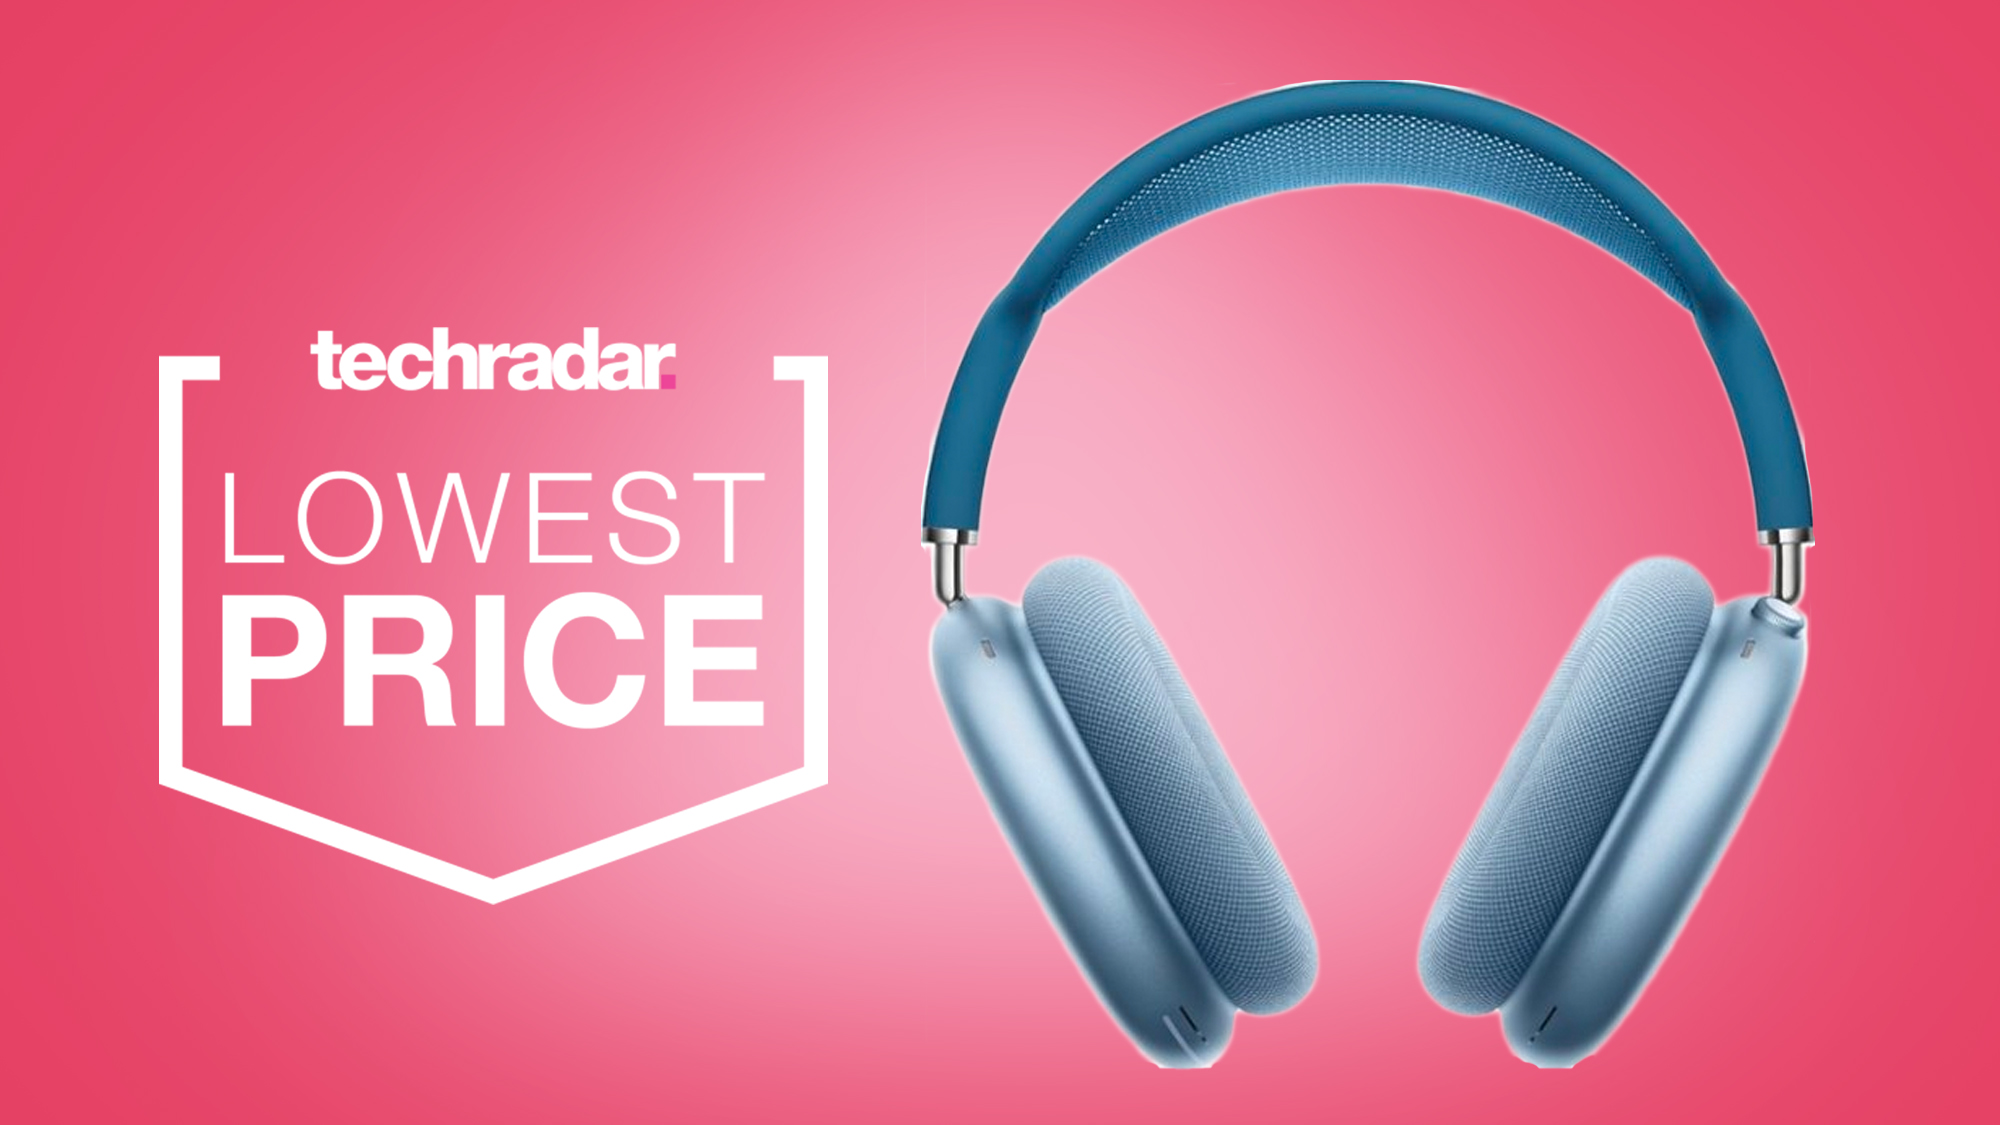 the airpods max headphones in blue against a pink background with a text box that reads 'lowest price'